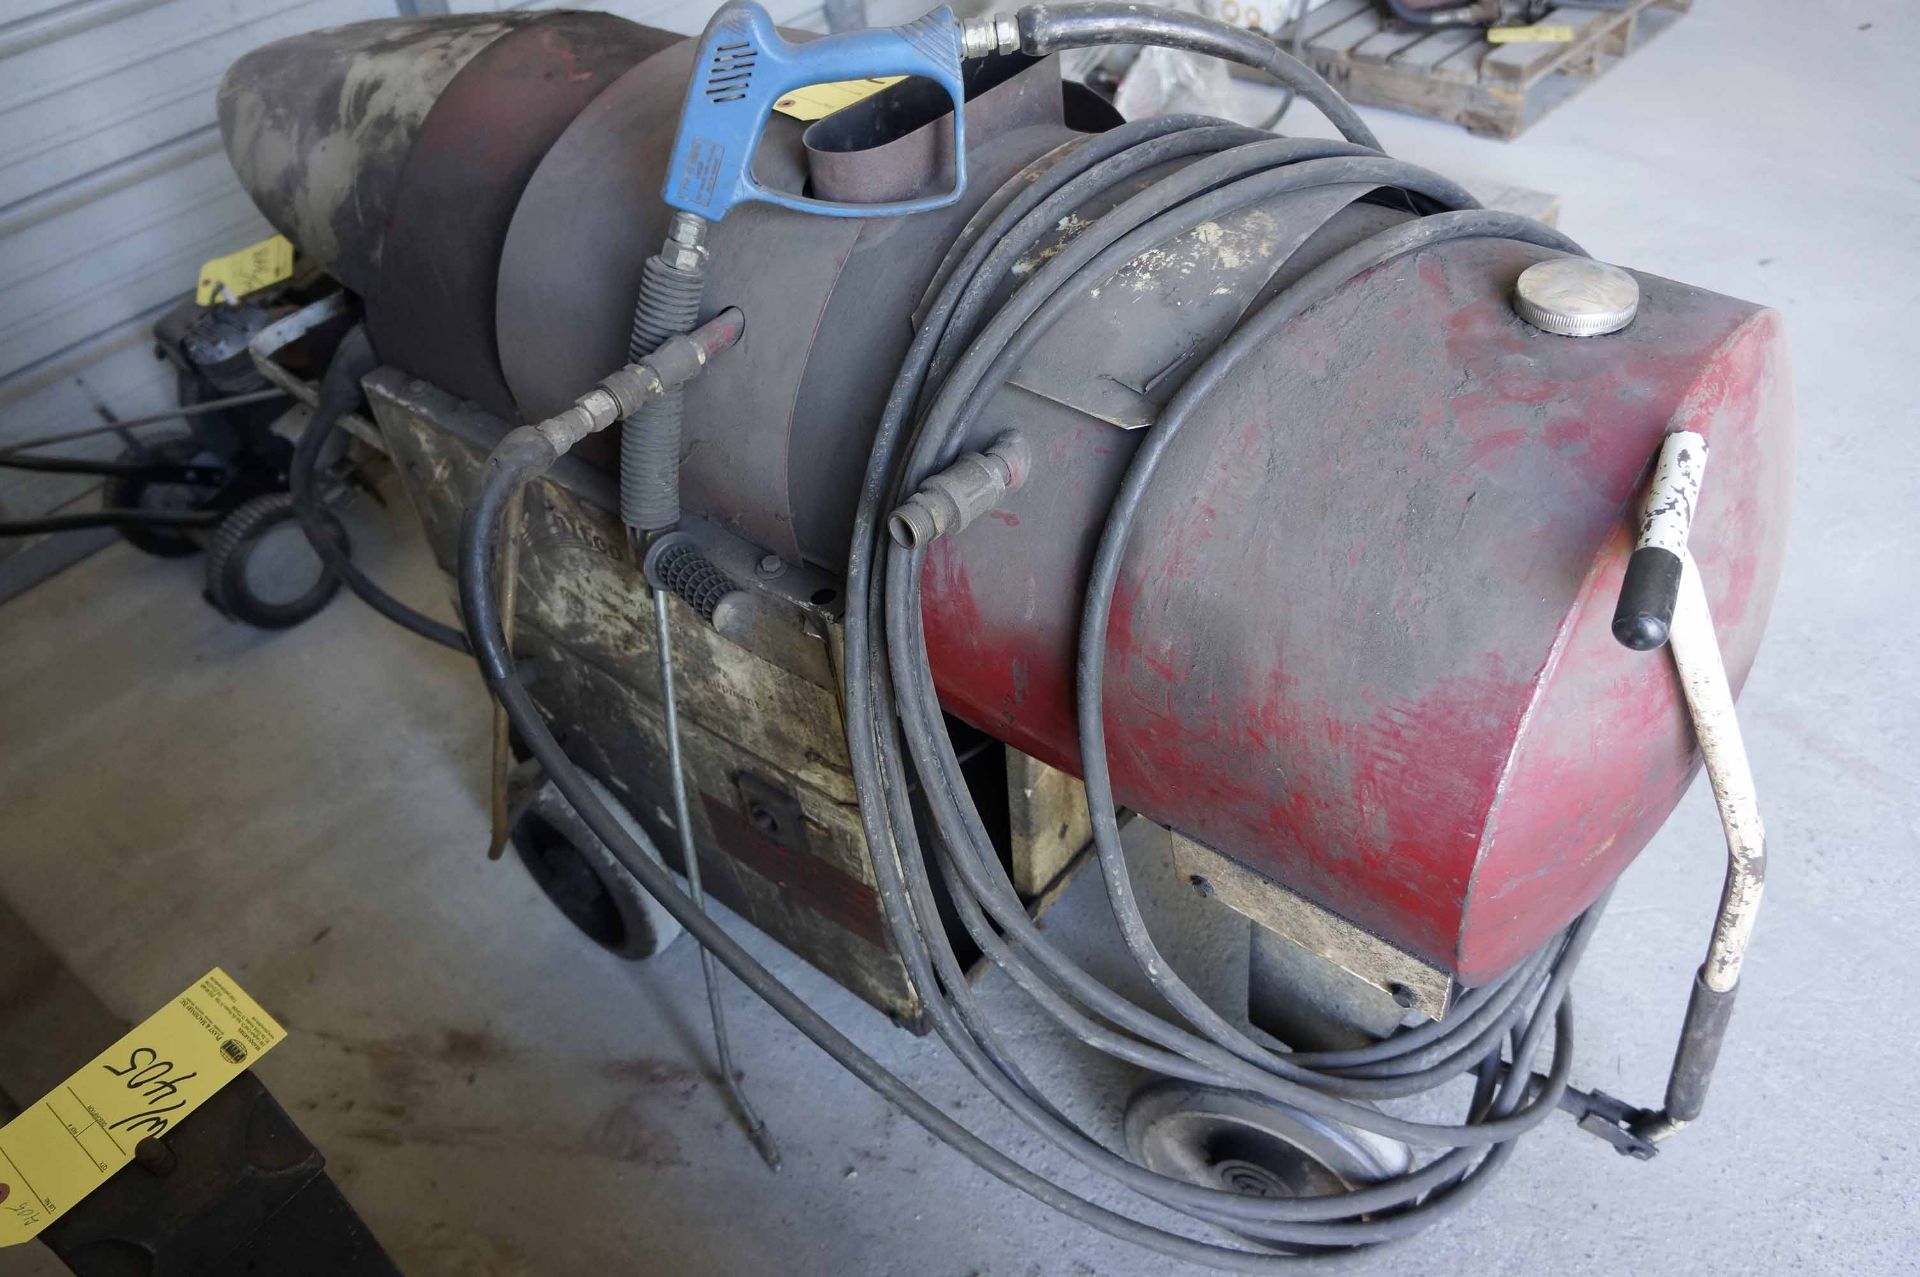 LOT CONSISTING OF: Whitco diesel pwrd. steam cleaner, Craftsman Lawn Edger & gas cans - Image 2 of 5